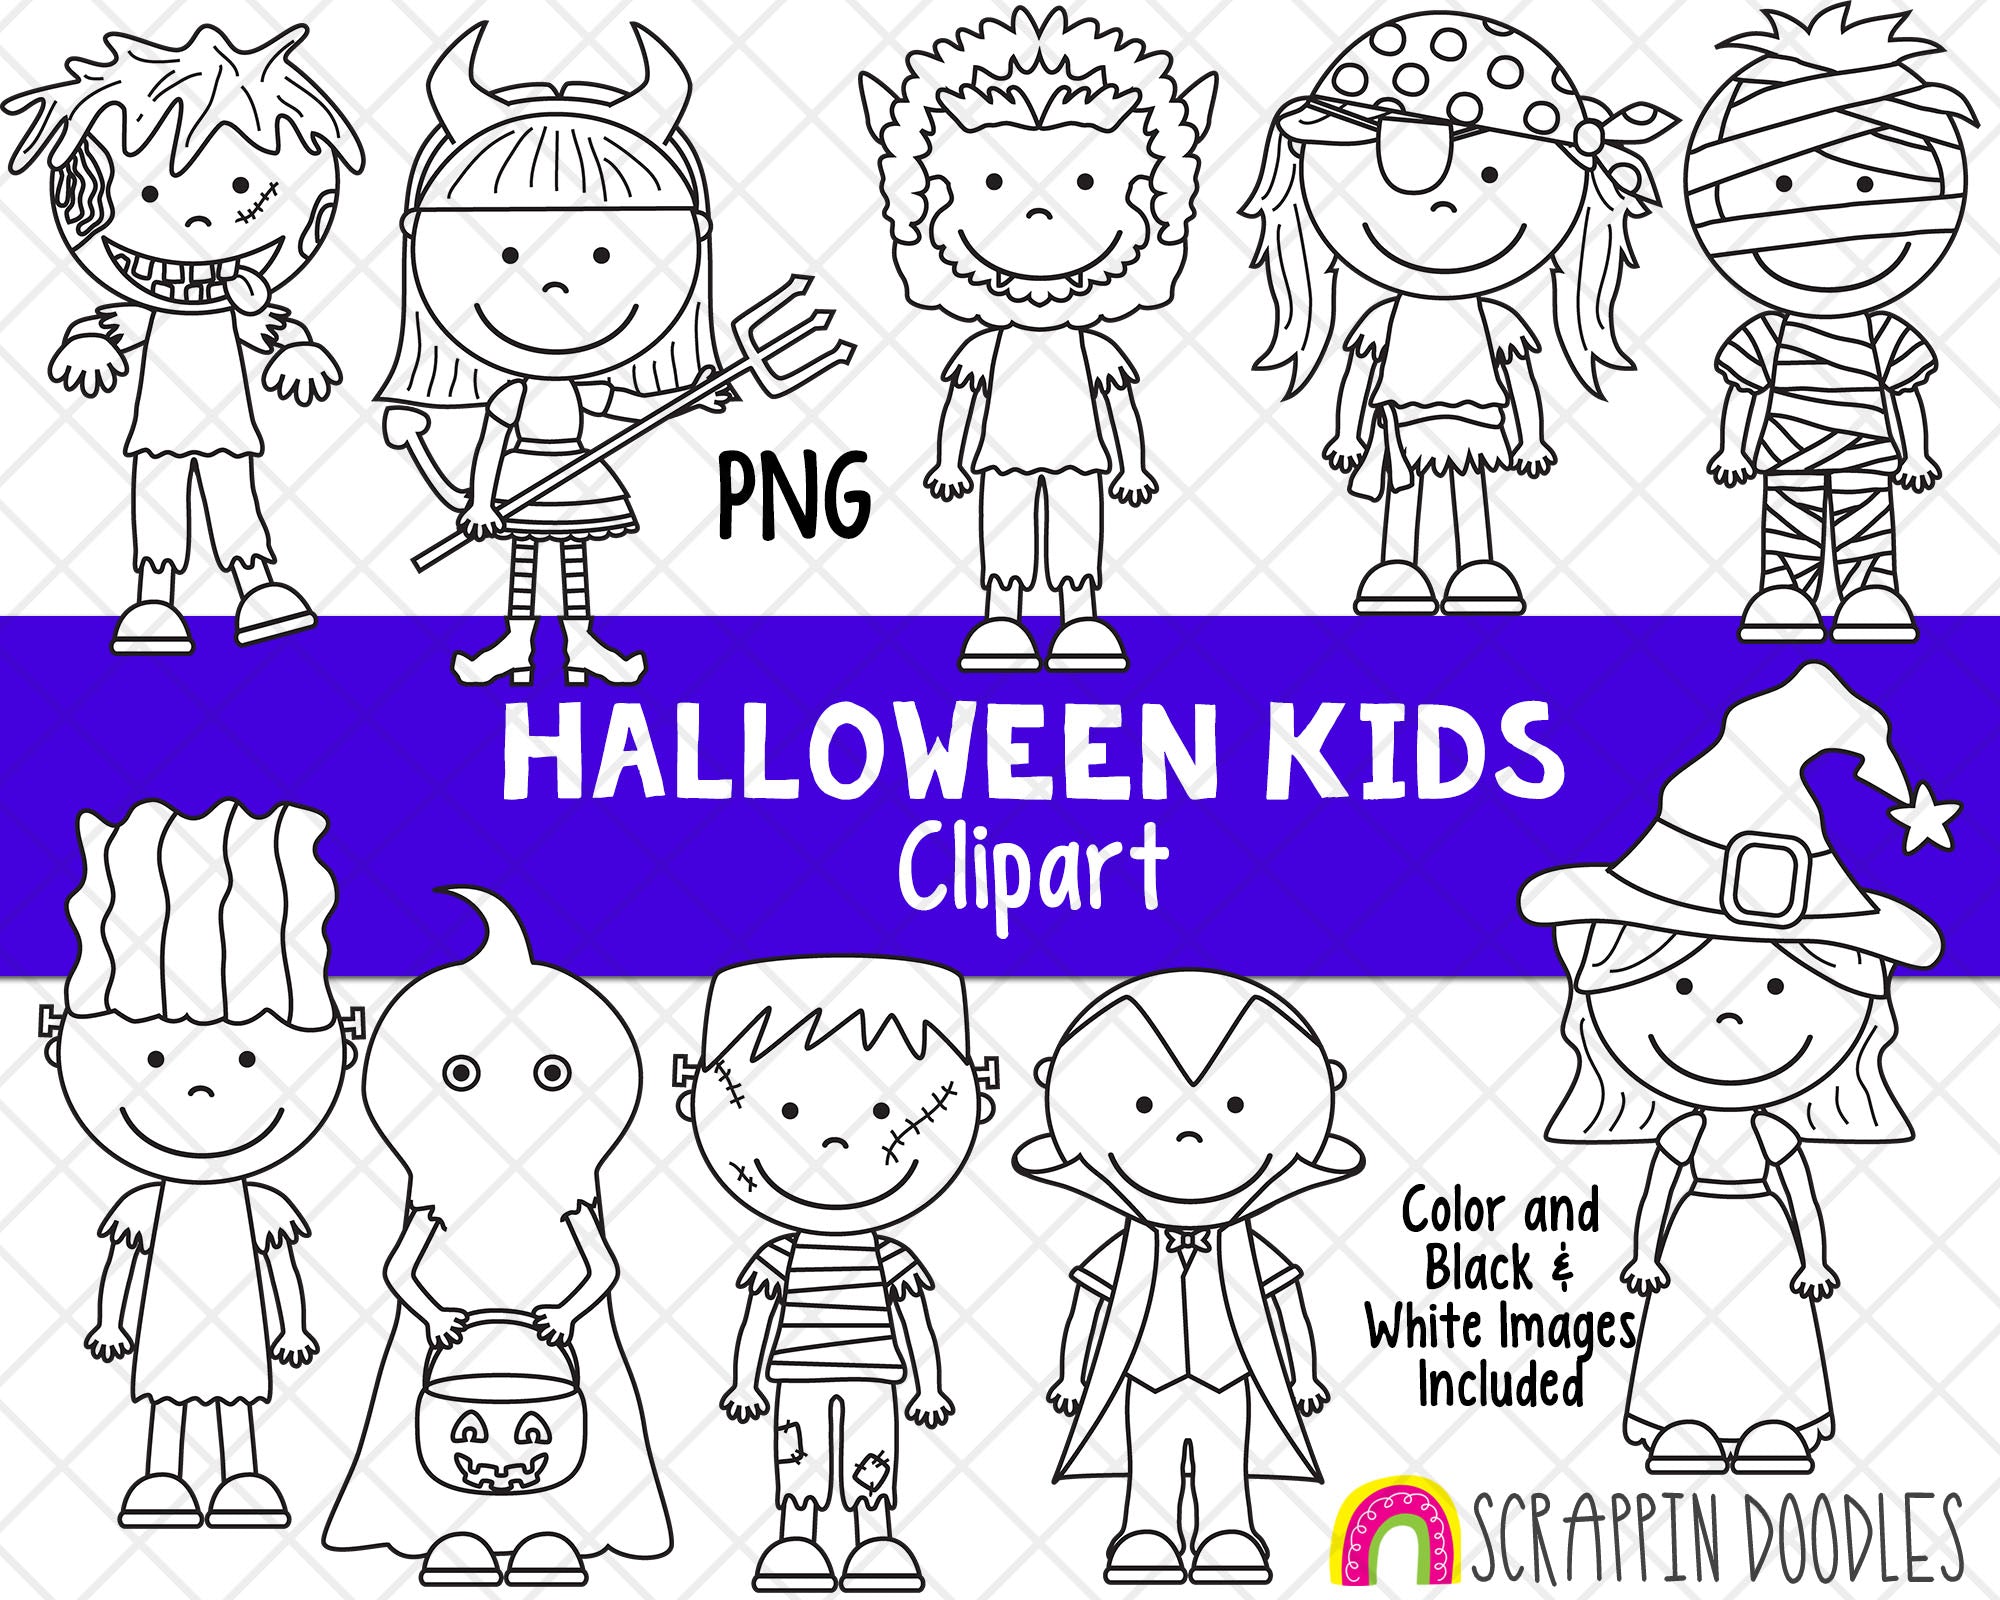 halloween party clip art black and white